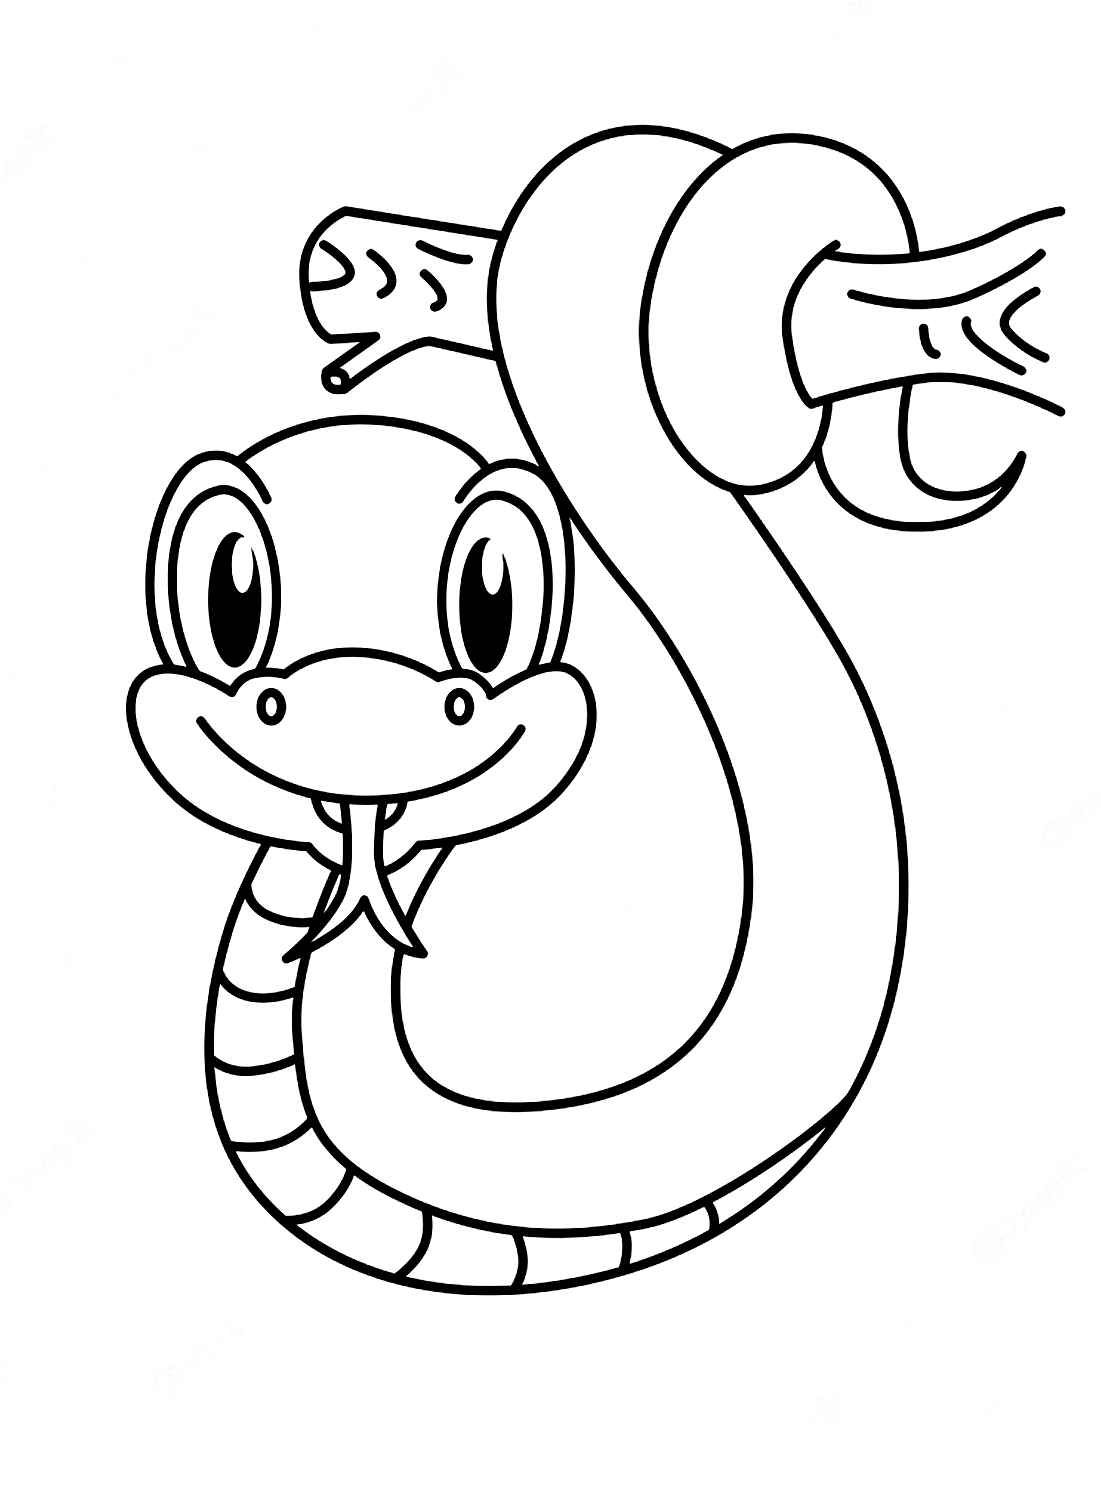 Colouring pages of snakes